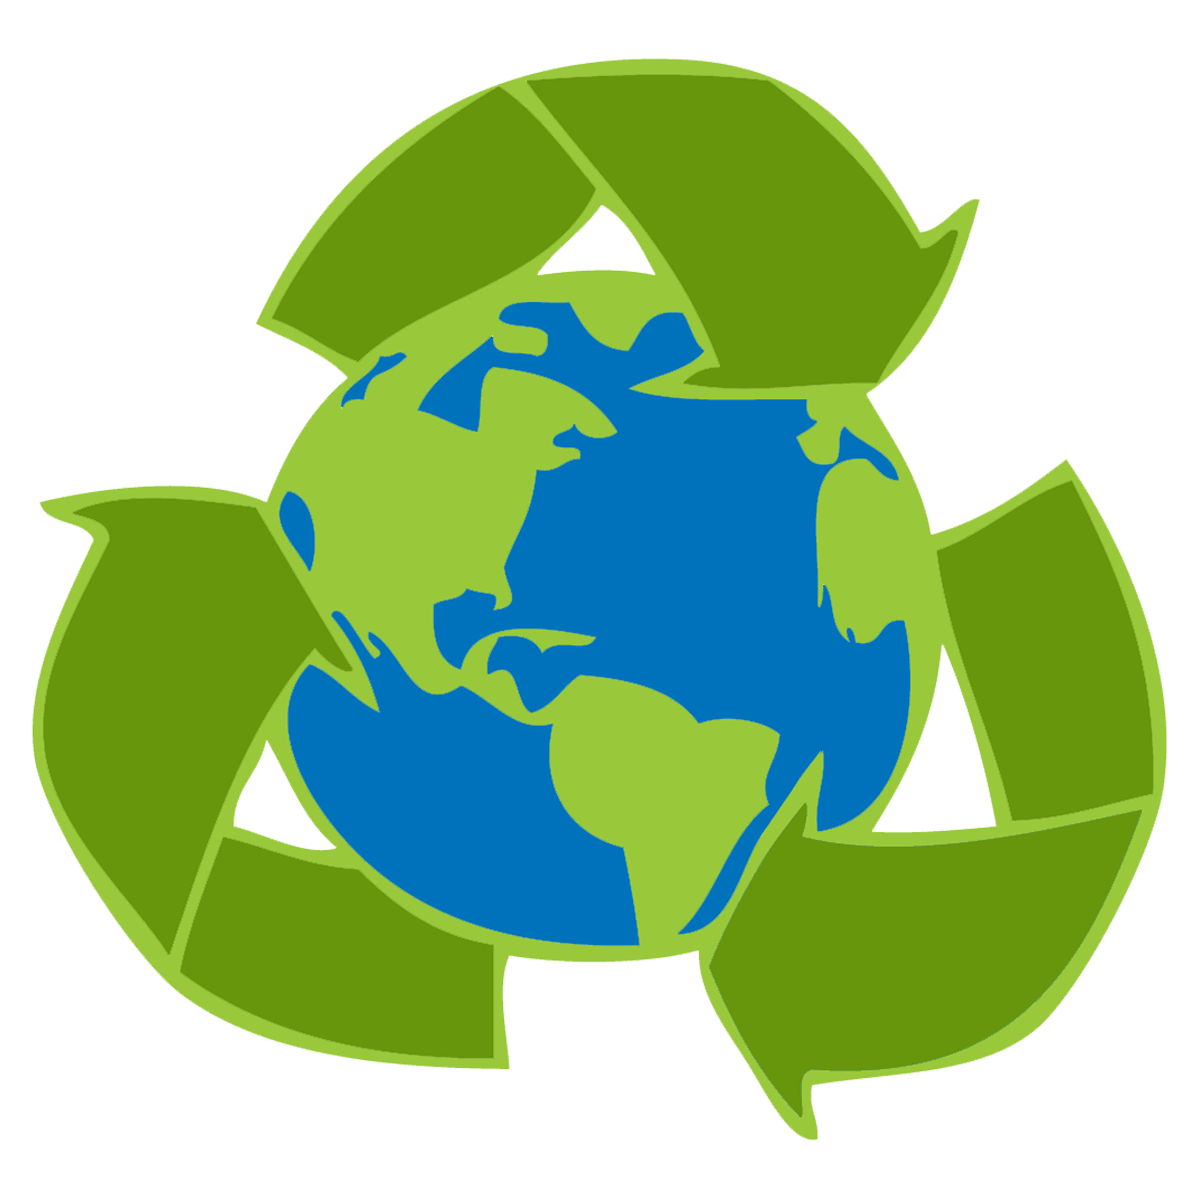 Earth clipart india. Planet logo free on